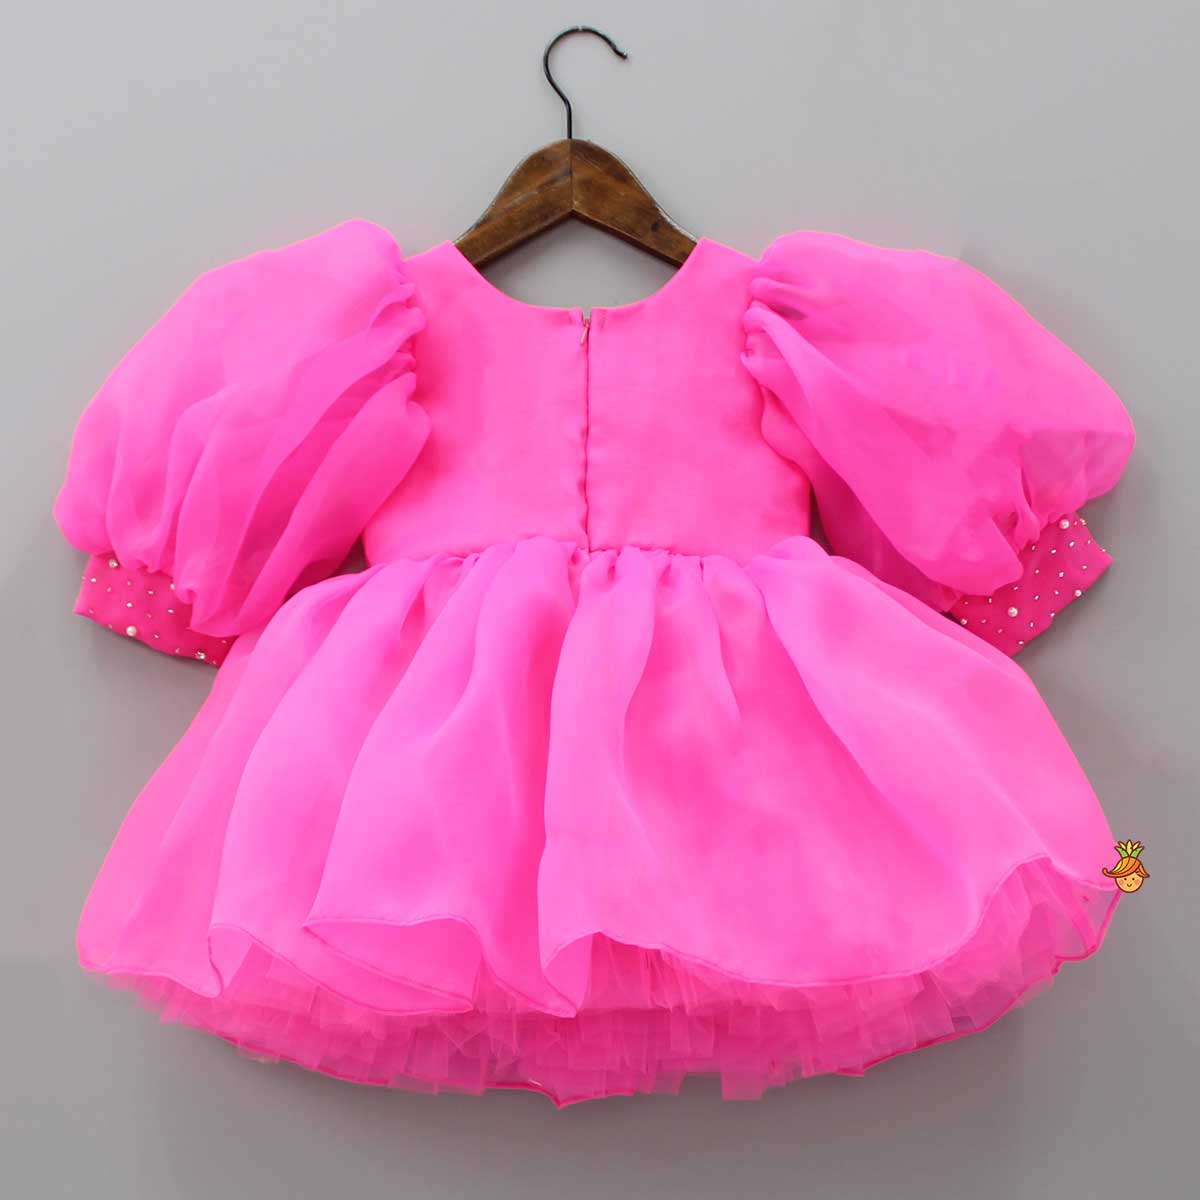 Pre Order: Cut Dana Embellished Gorgeous Pink Dress With Matching Swirled Hair Clip